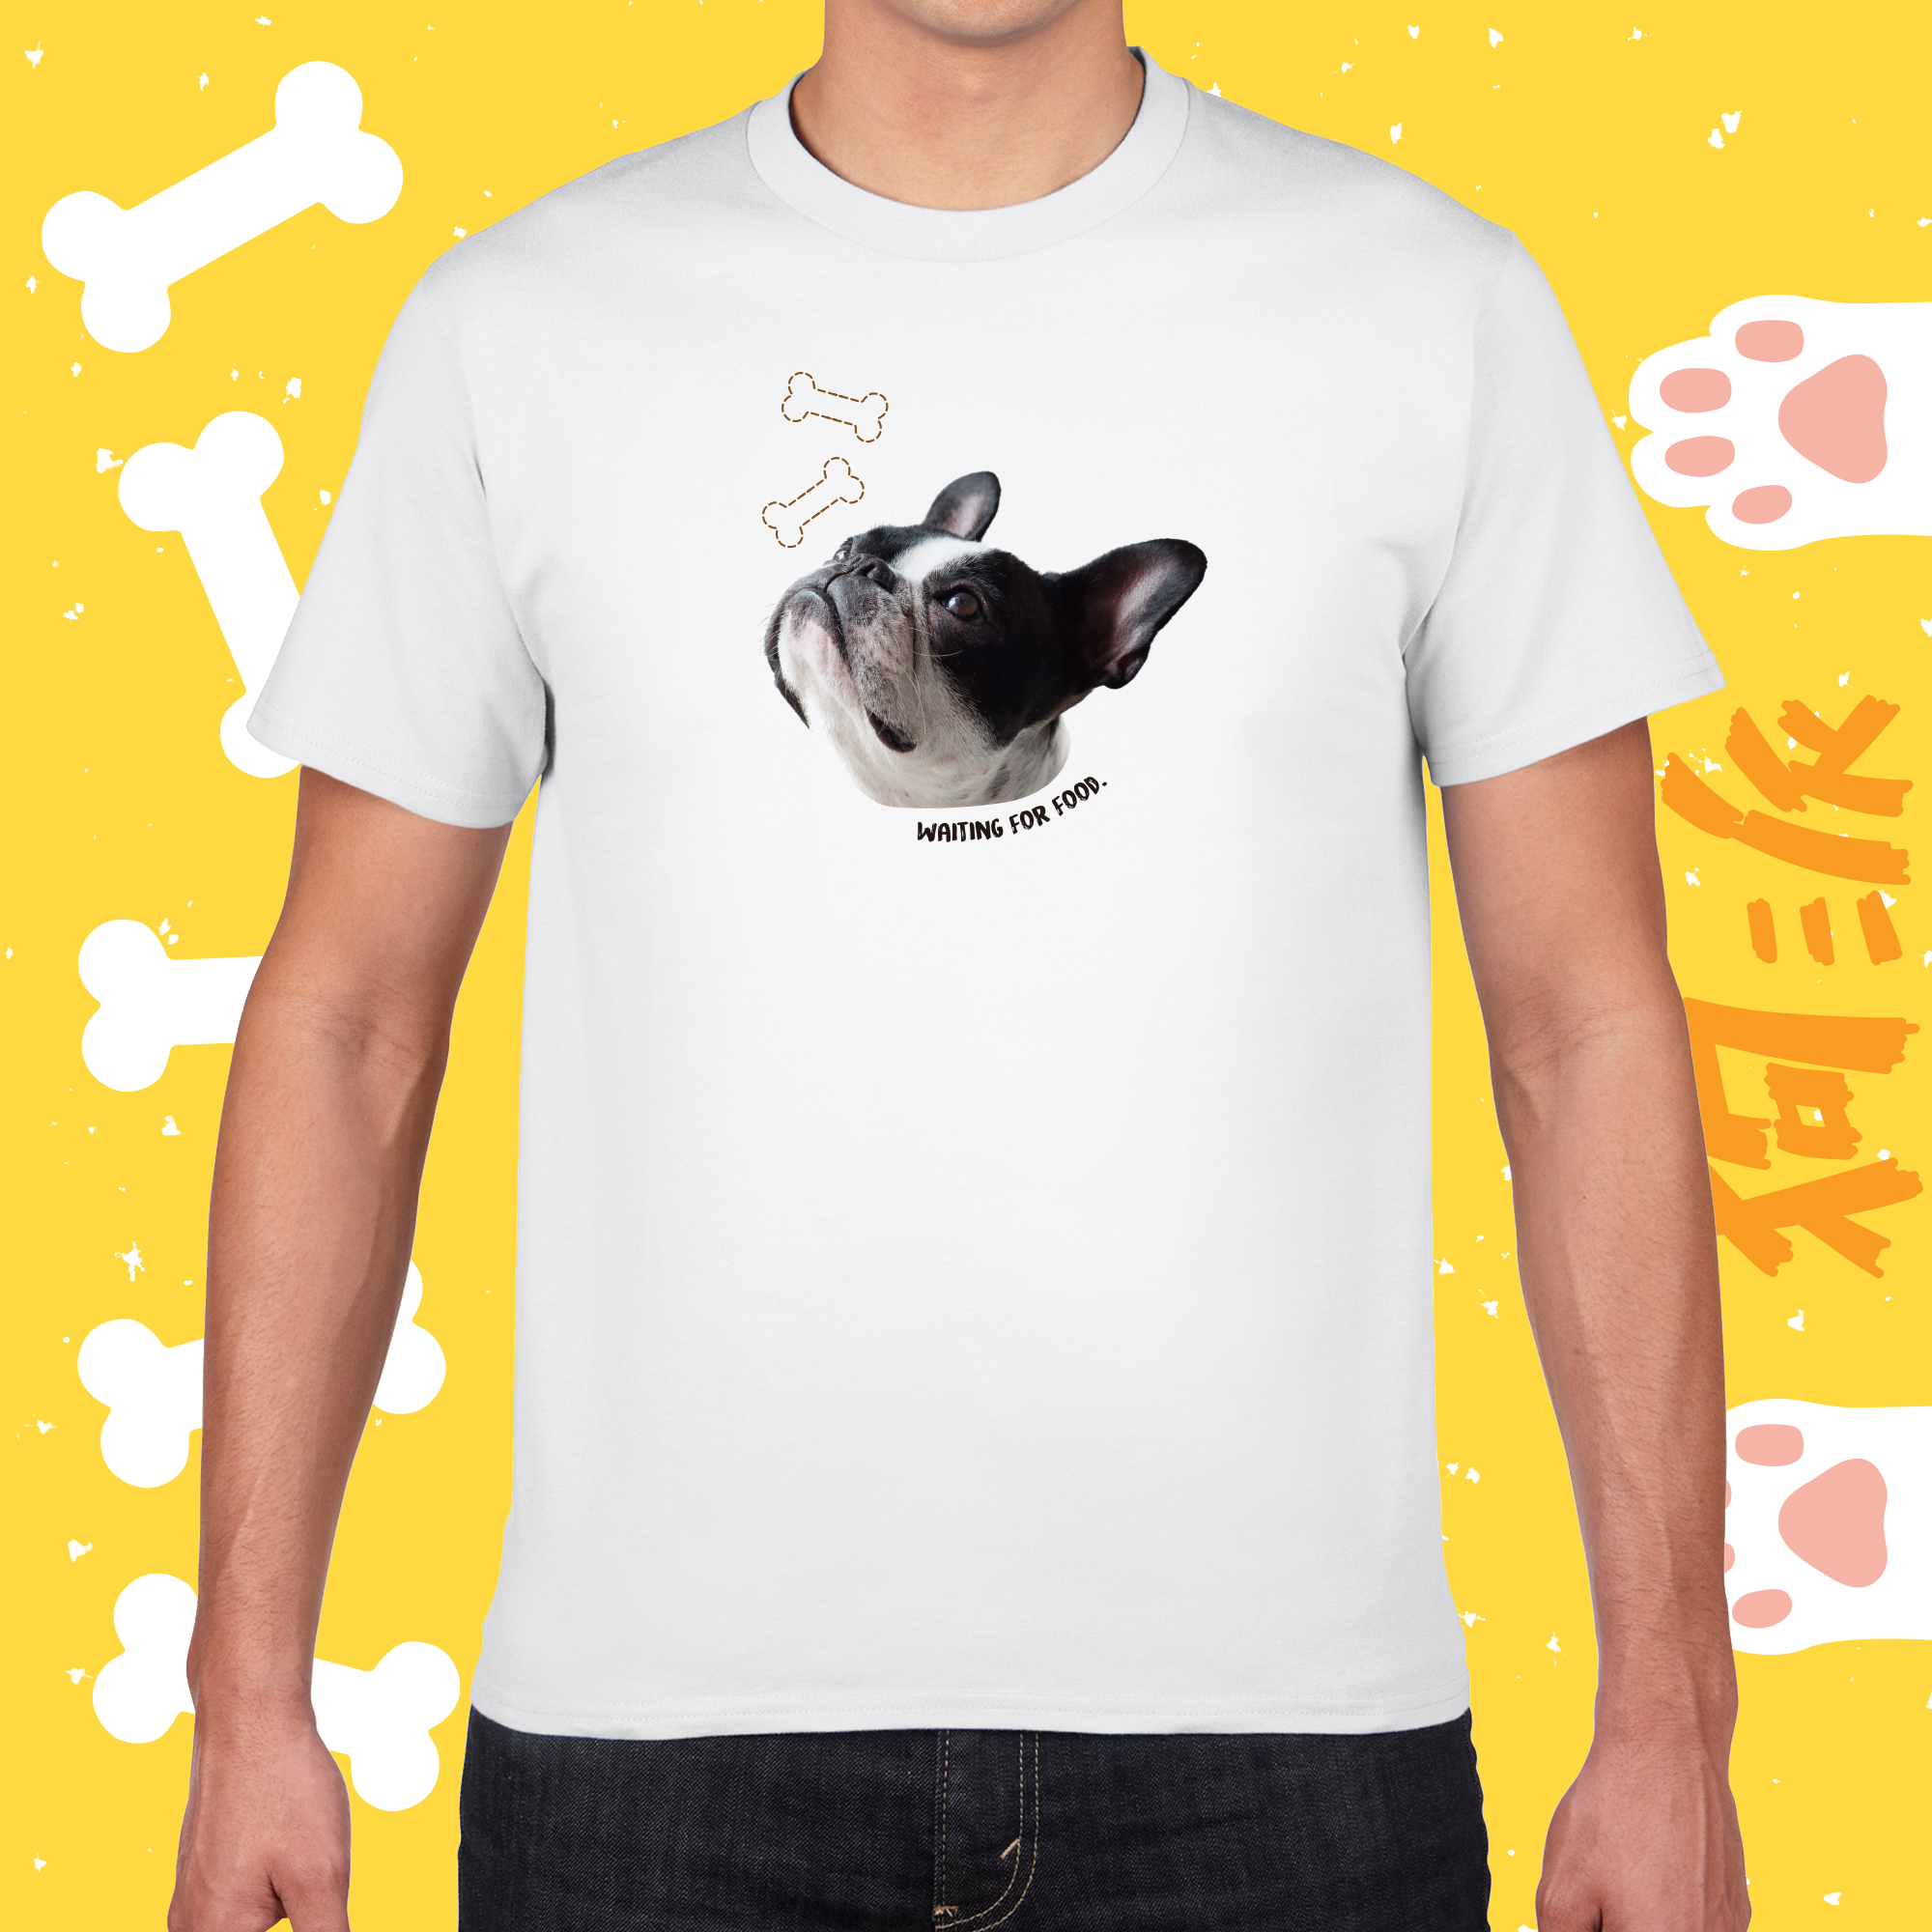 【In Stock】Doggy-Waiting For Food Short Sleeve T-shirt